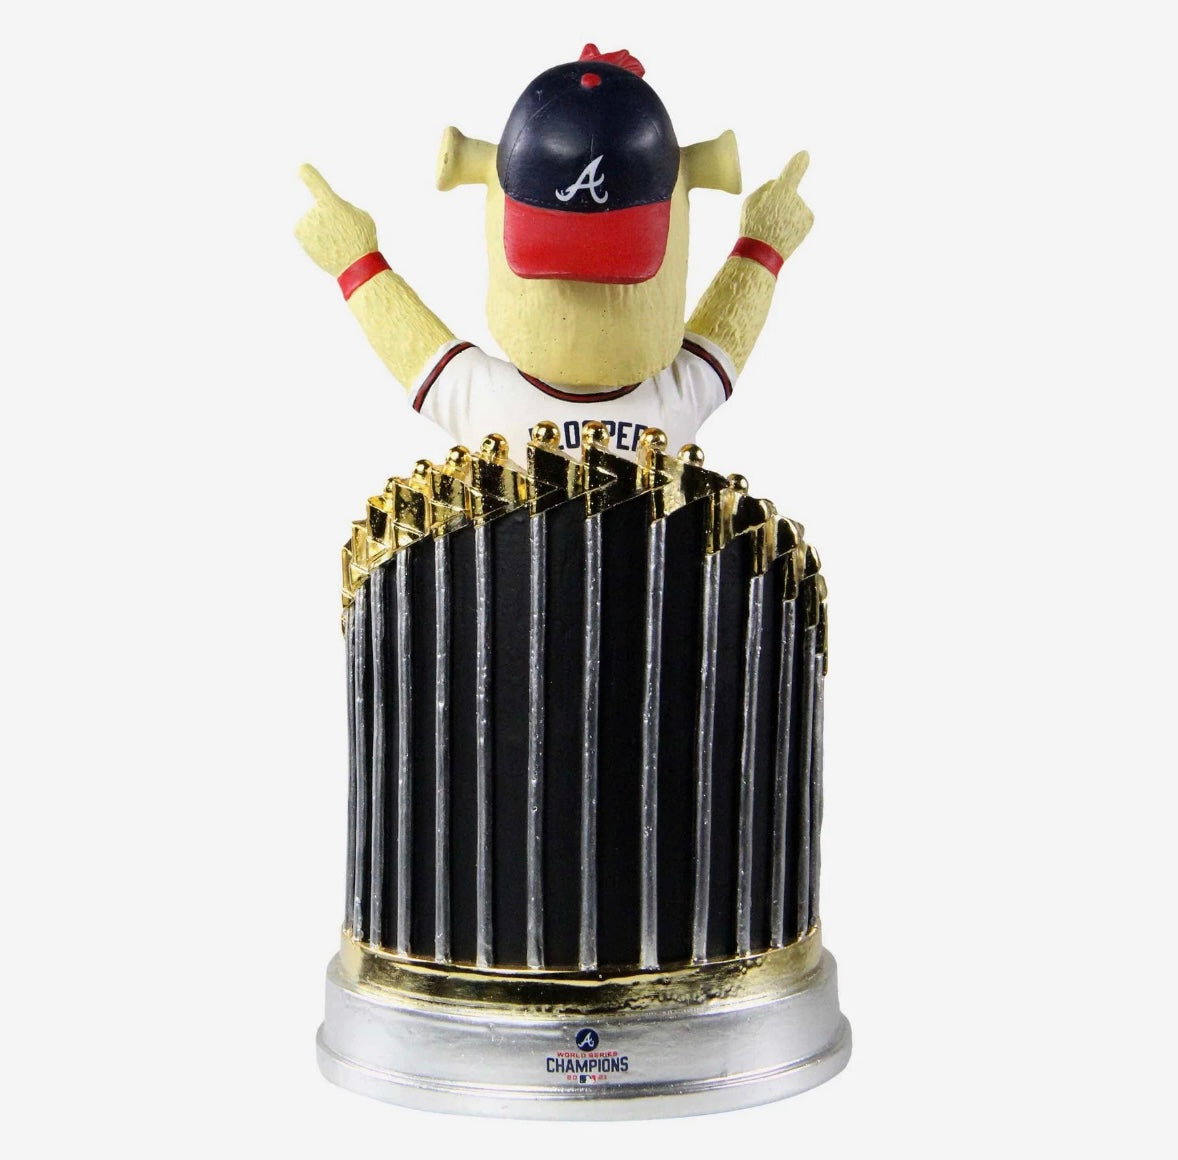 Official Atlanta Braves 2021 World Series Champions Bobbleheads now  available